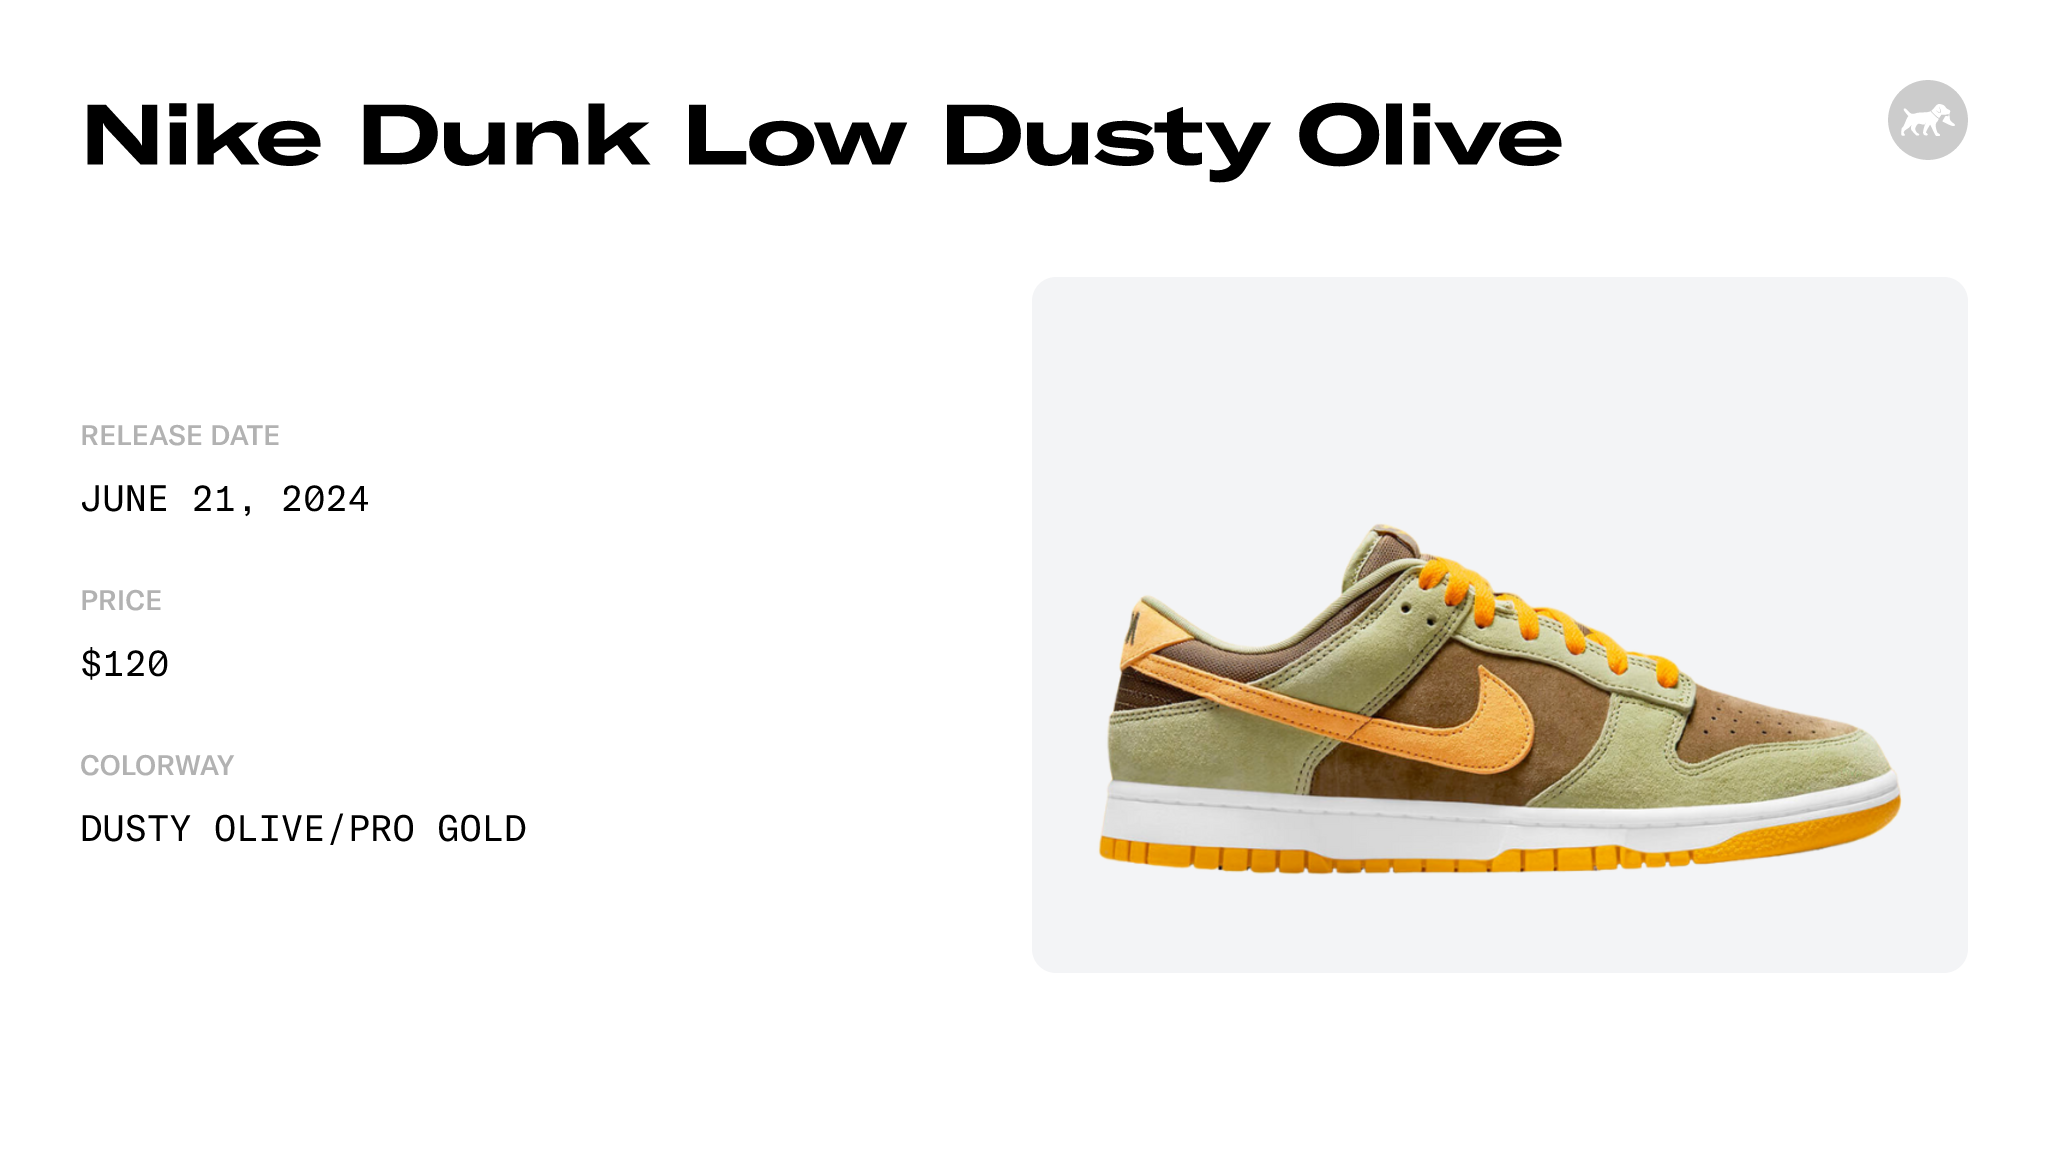 Release Dusty DH5360-300 Nike Dunk and Date Olive - Low Raffles